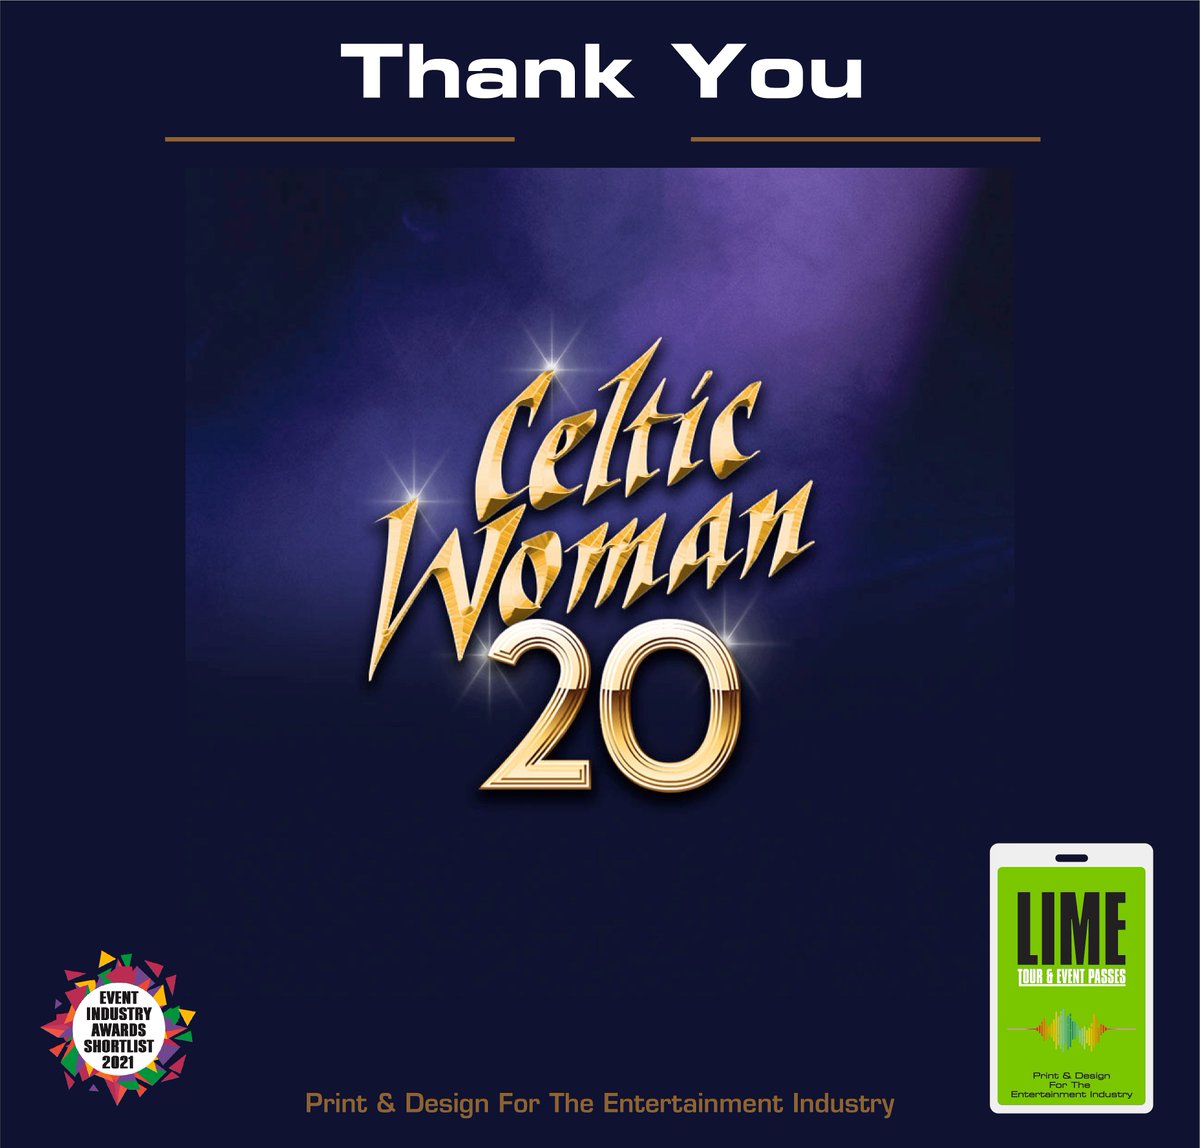 Big thank you to @Celtic_Woman for having us do all the AAA passes for the 20 year anniversary one off recording @TheHelixDublin , it was an honor #laminate #pass #backstage #aaa #vip #access #crew #tm #tour #festival #ireland #irish #event #eventsireland #dublin